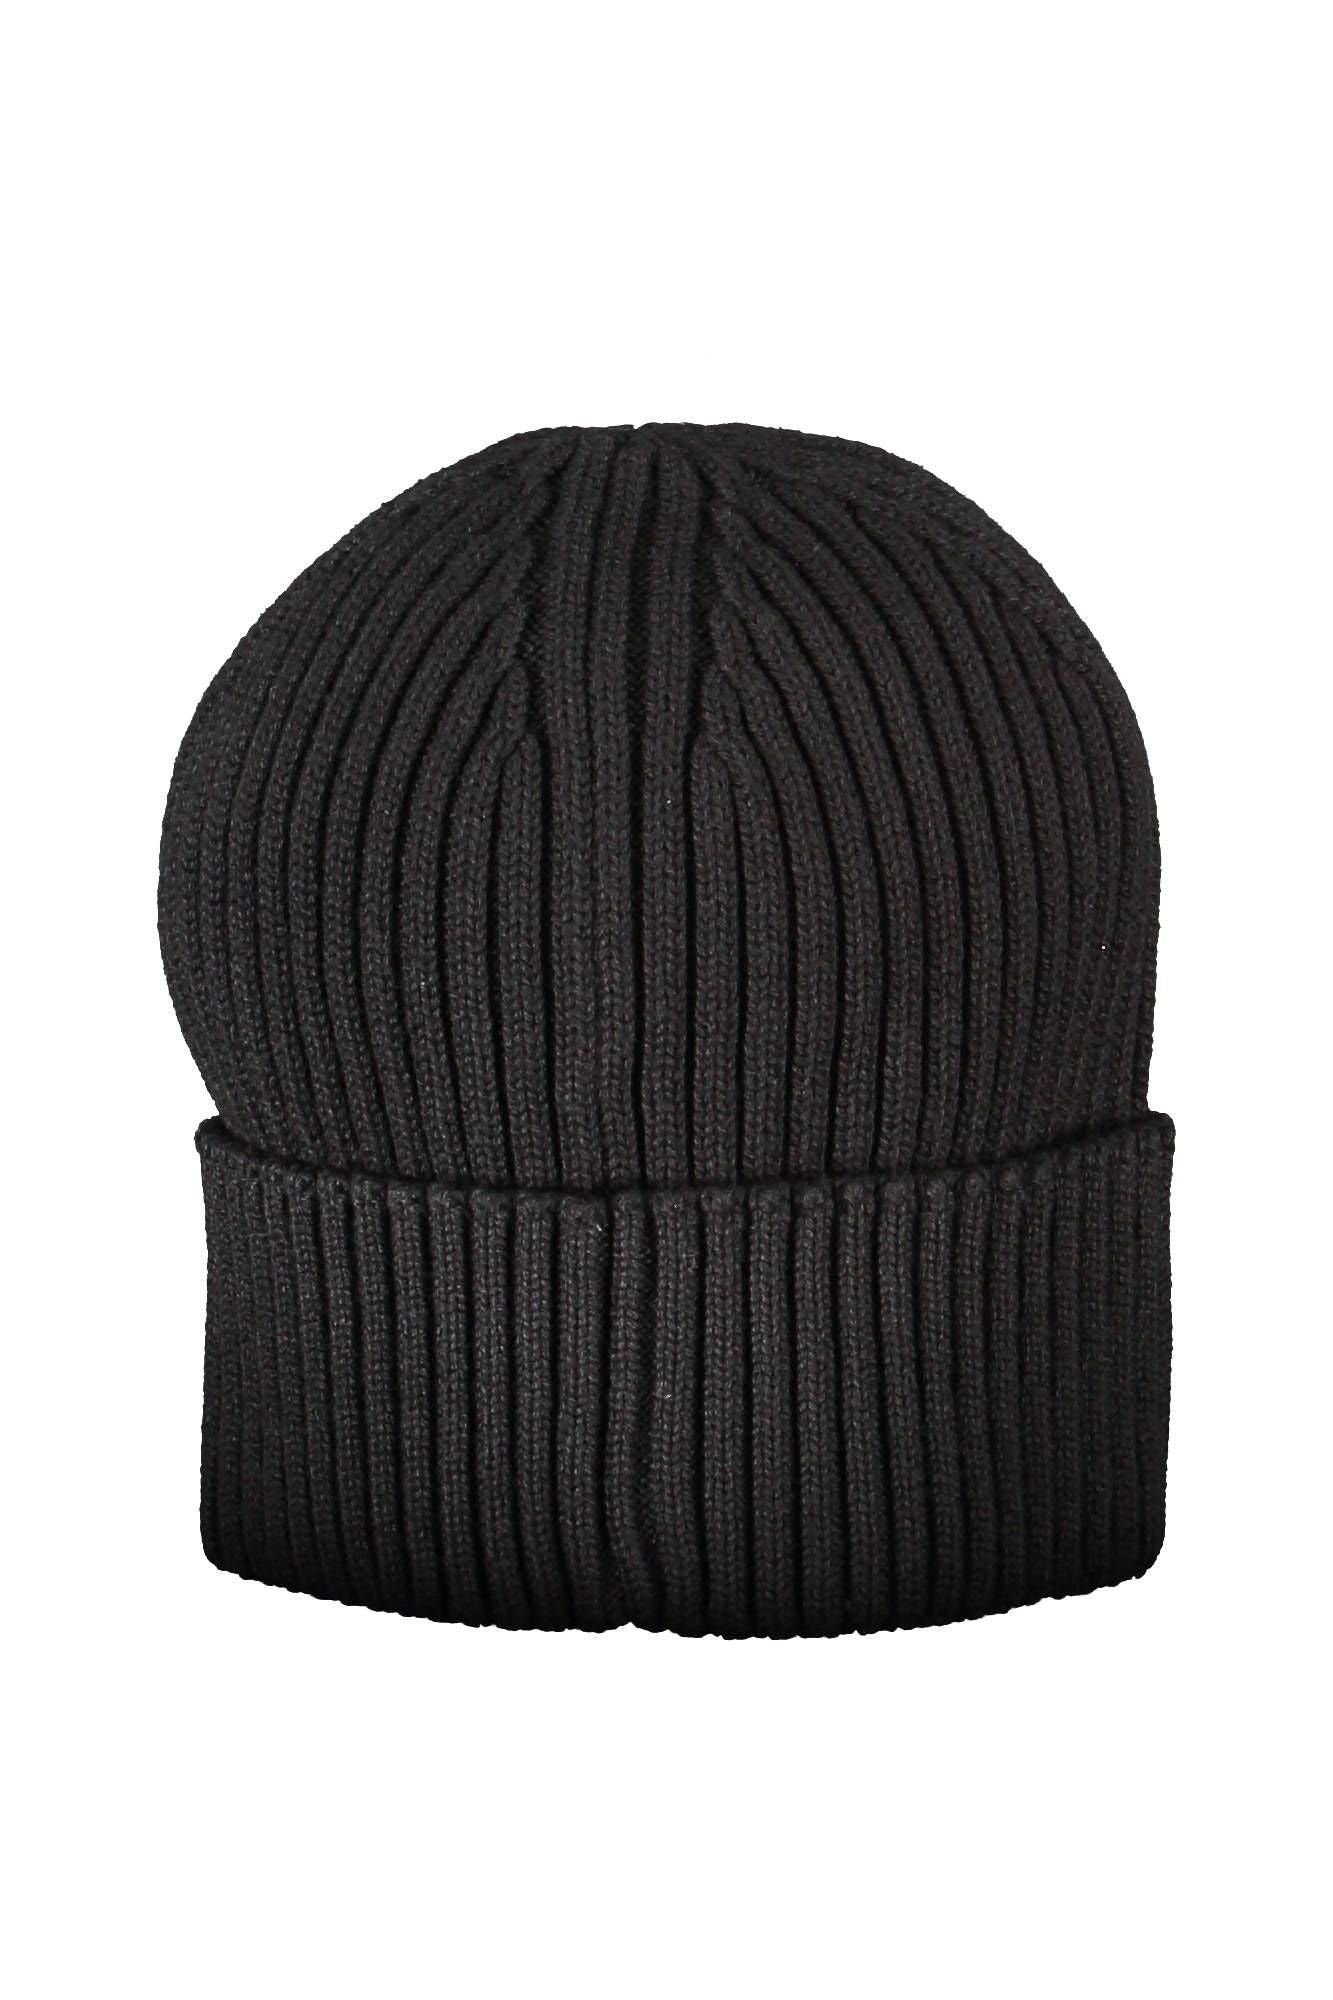 Eco-Friendly Embroidered Black Cap